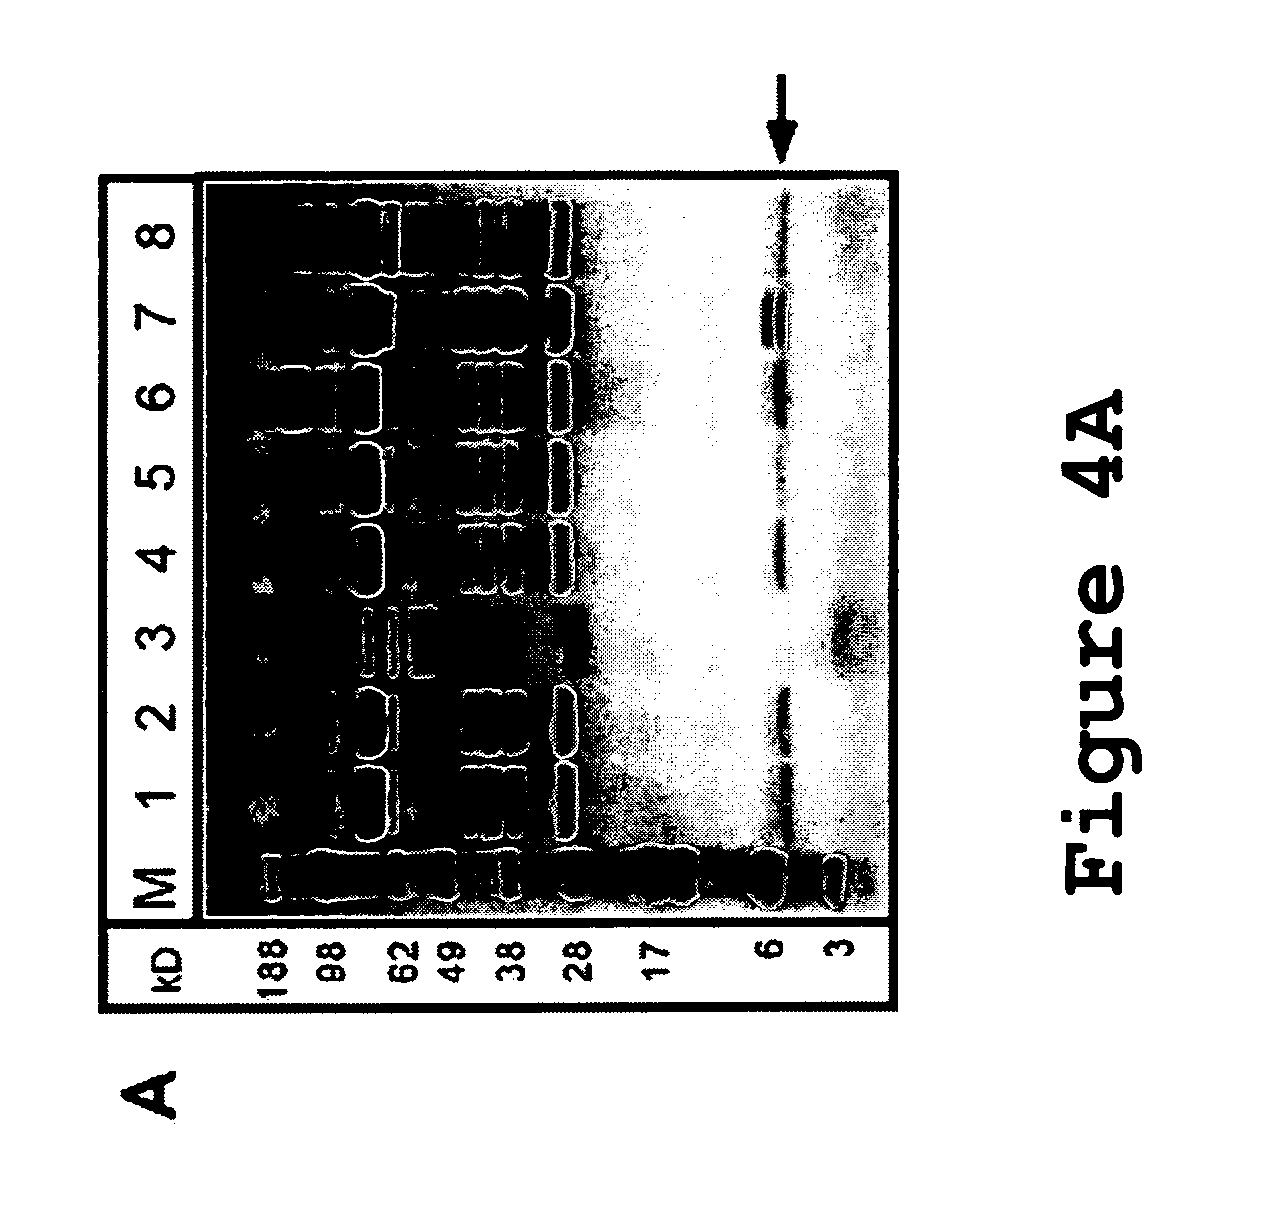 Interleukin-12p40 variants with improved stability